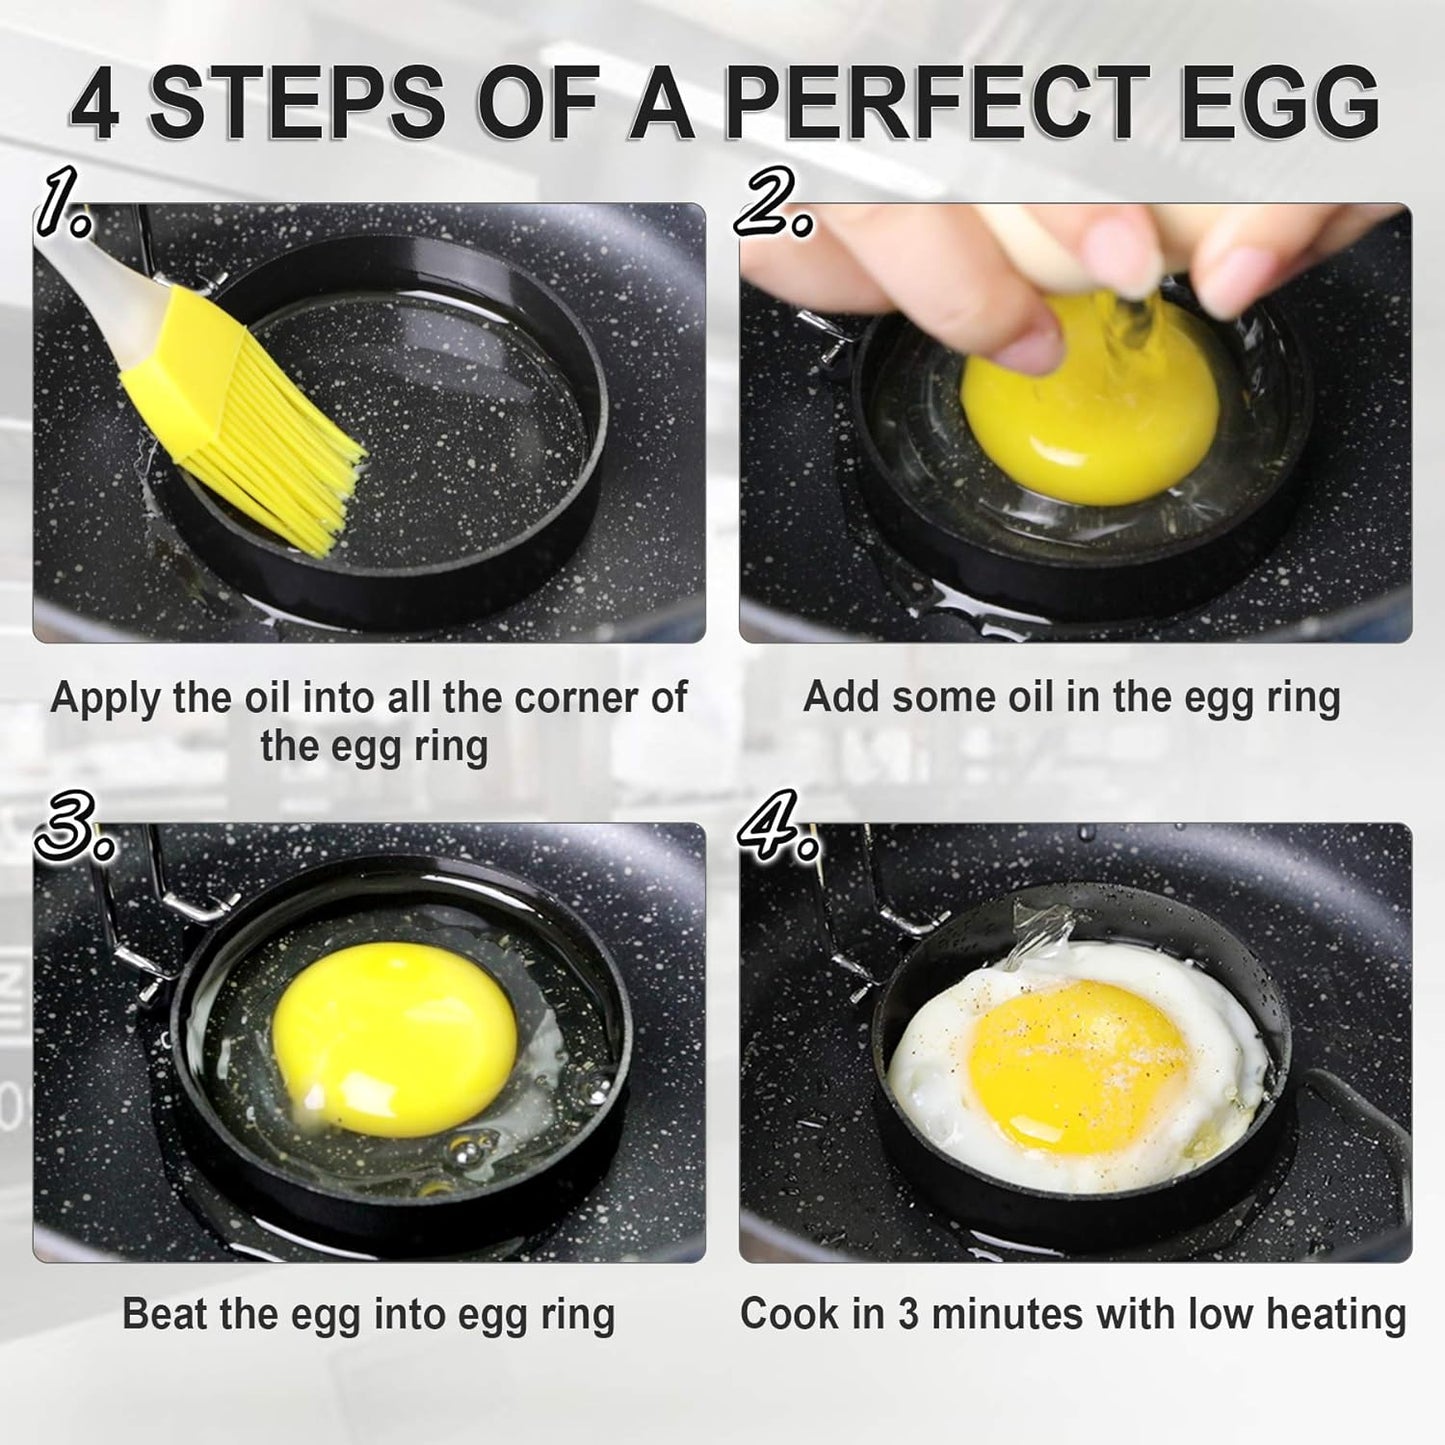 Egg Shapers For Frying, Fried Egg Maker Mold For Cooking, Non Stick Metal Round Egg Cooker Ring Kitchen Cooking Tools Egg Rings For Griddle, 7.5 x 7.5 x 7 Centimeters, Black Set of 4